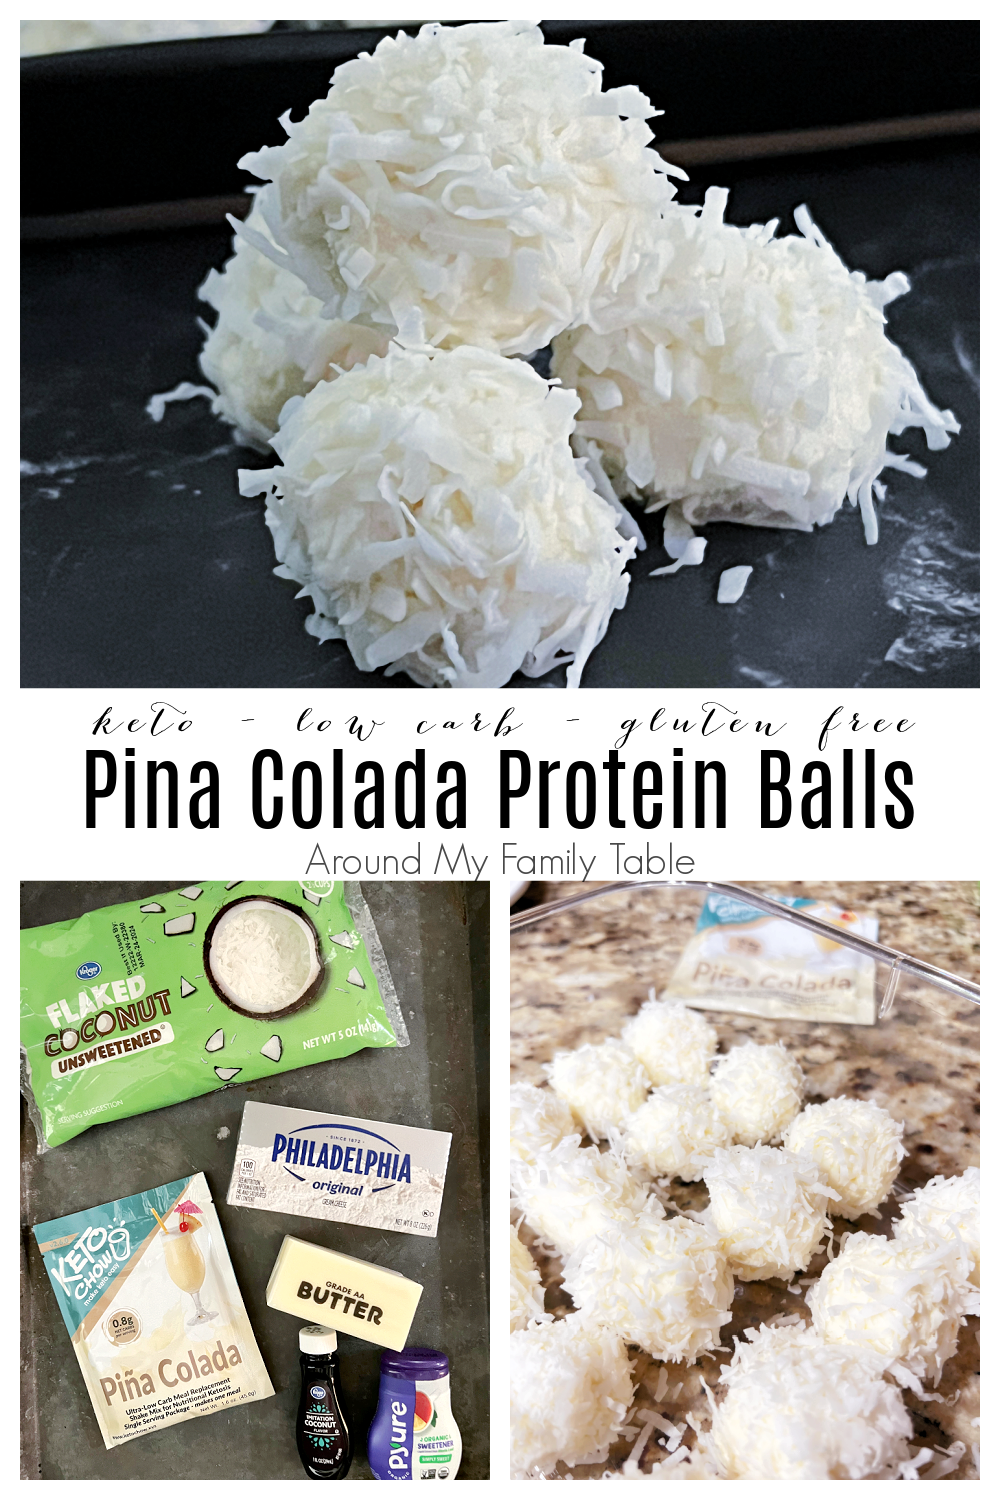 My no bake, Pina Colada Protein Balls feature a mix of protein powder, healthy fats, and coconut. Pop one of these bite sized treats in your mouth for a quick protein & energy fix. via @slingmama